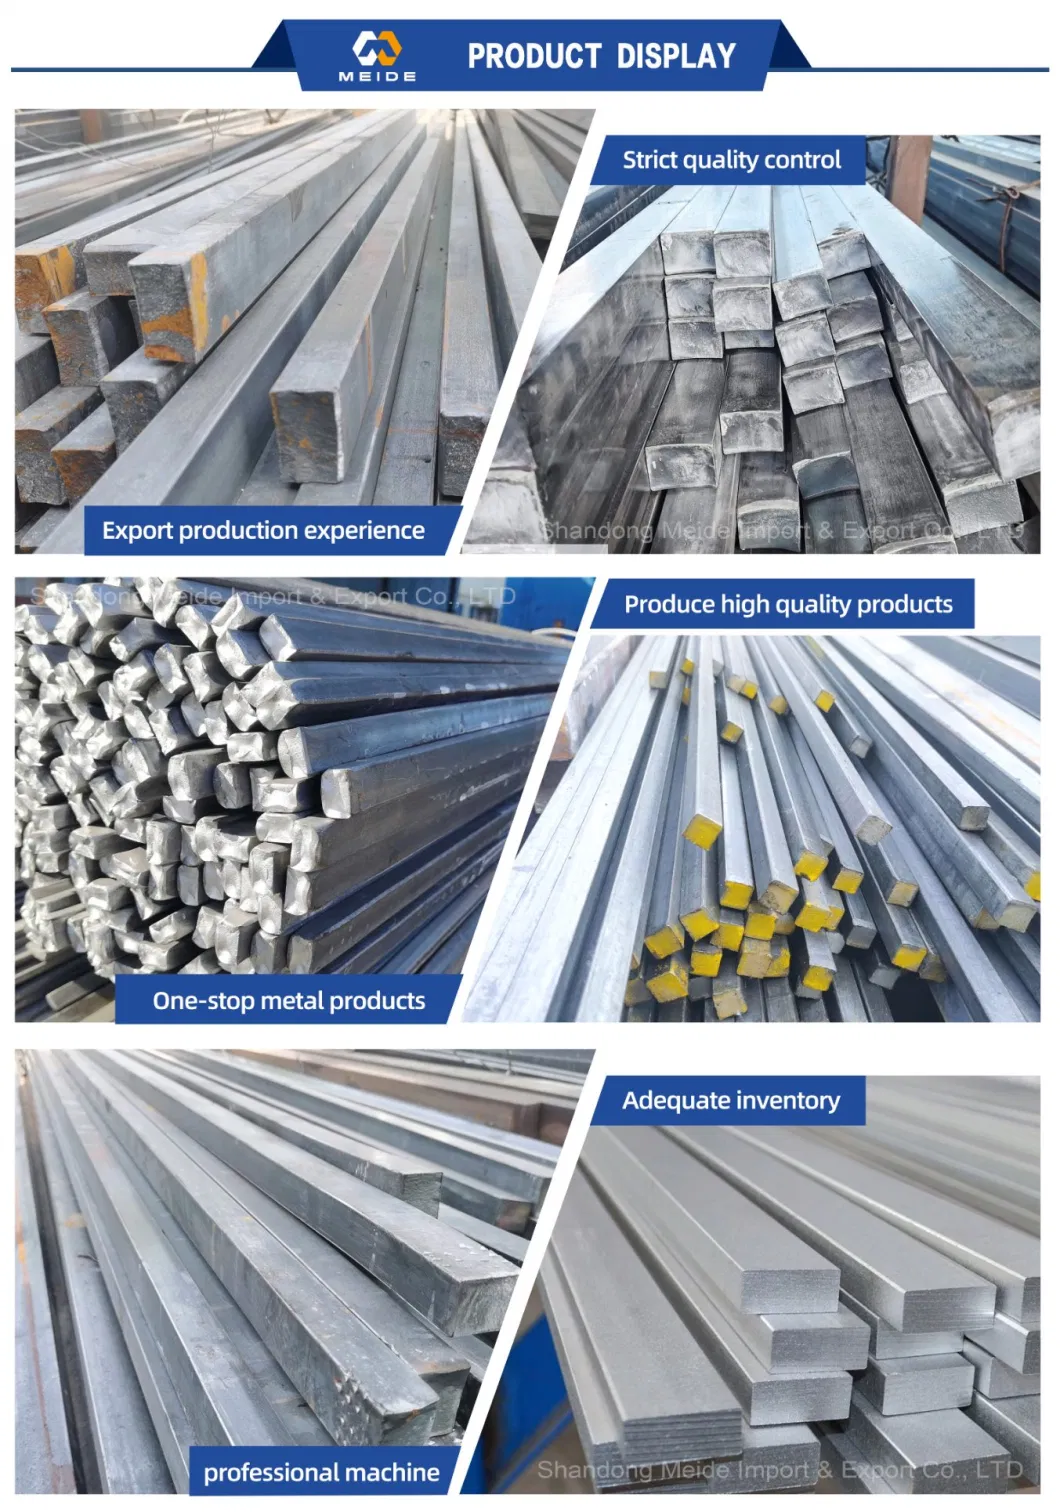 12mm Alloy Steel in Bar Series Metal Rod 5120/5140/4140/4130 304 316 Flat Angles Bar Square Hexagonal Rod Stainless Steel Round Bar